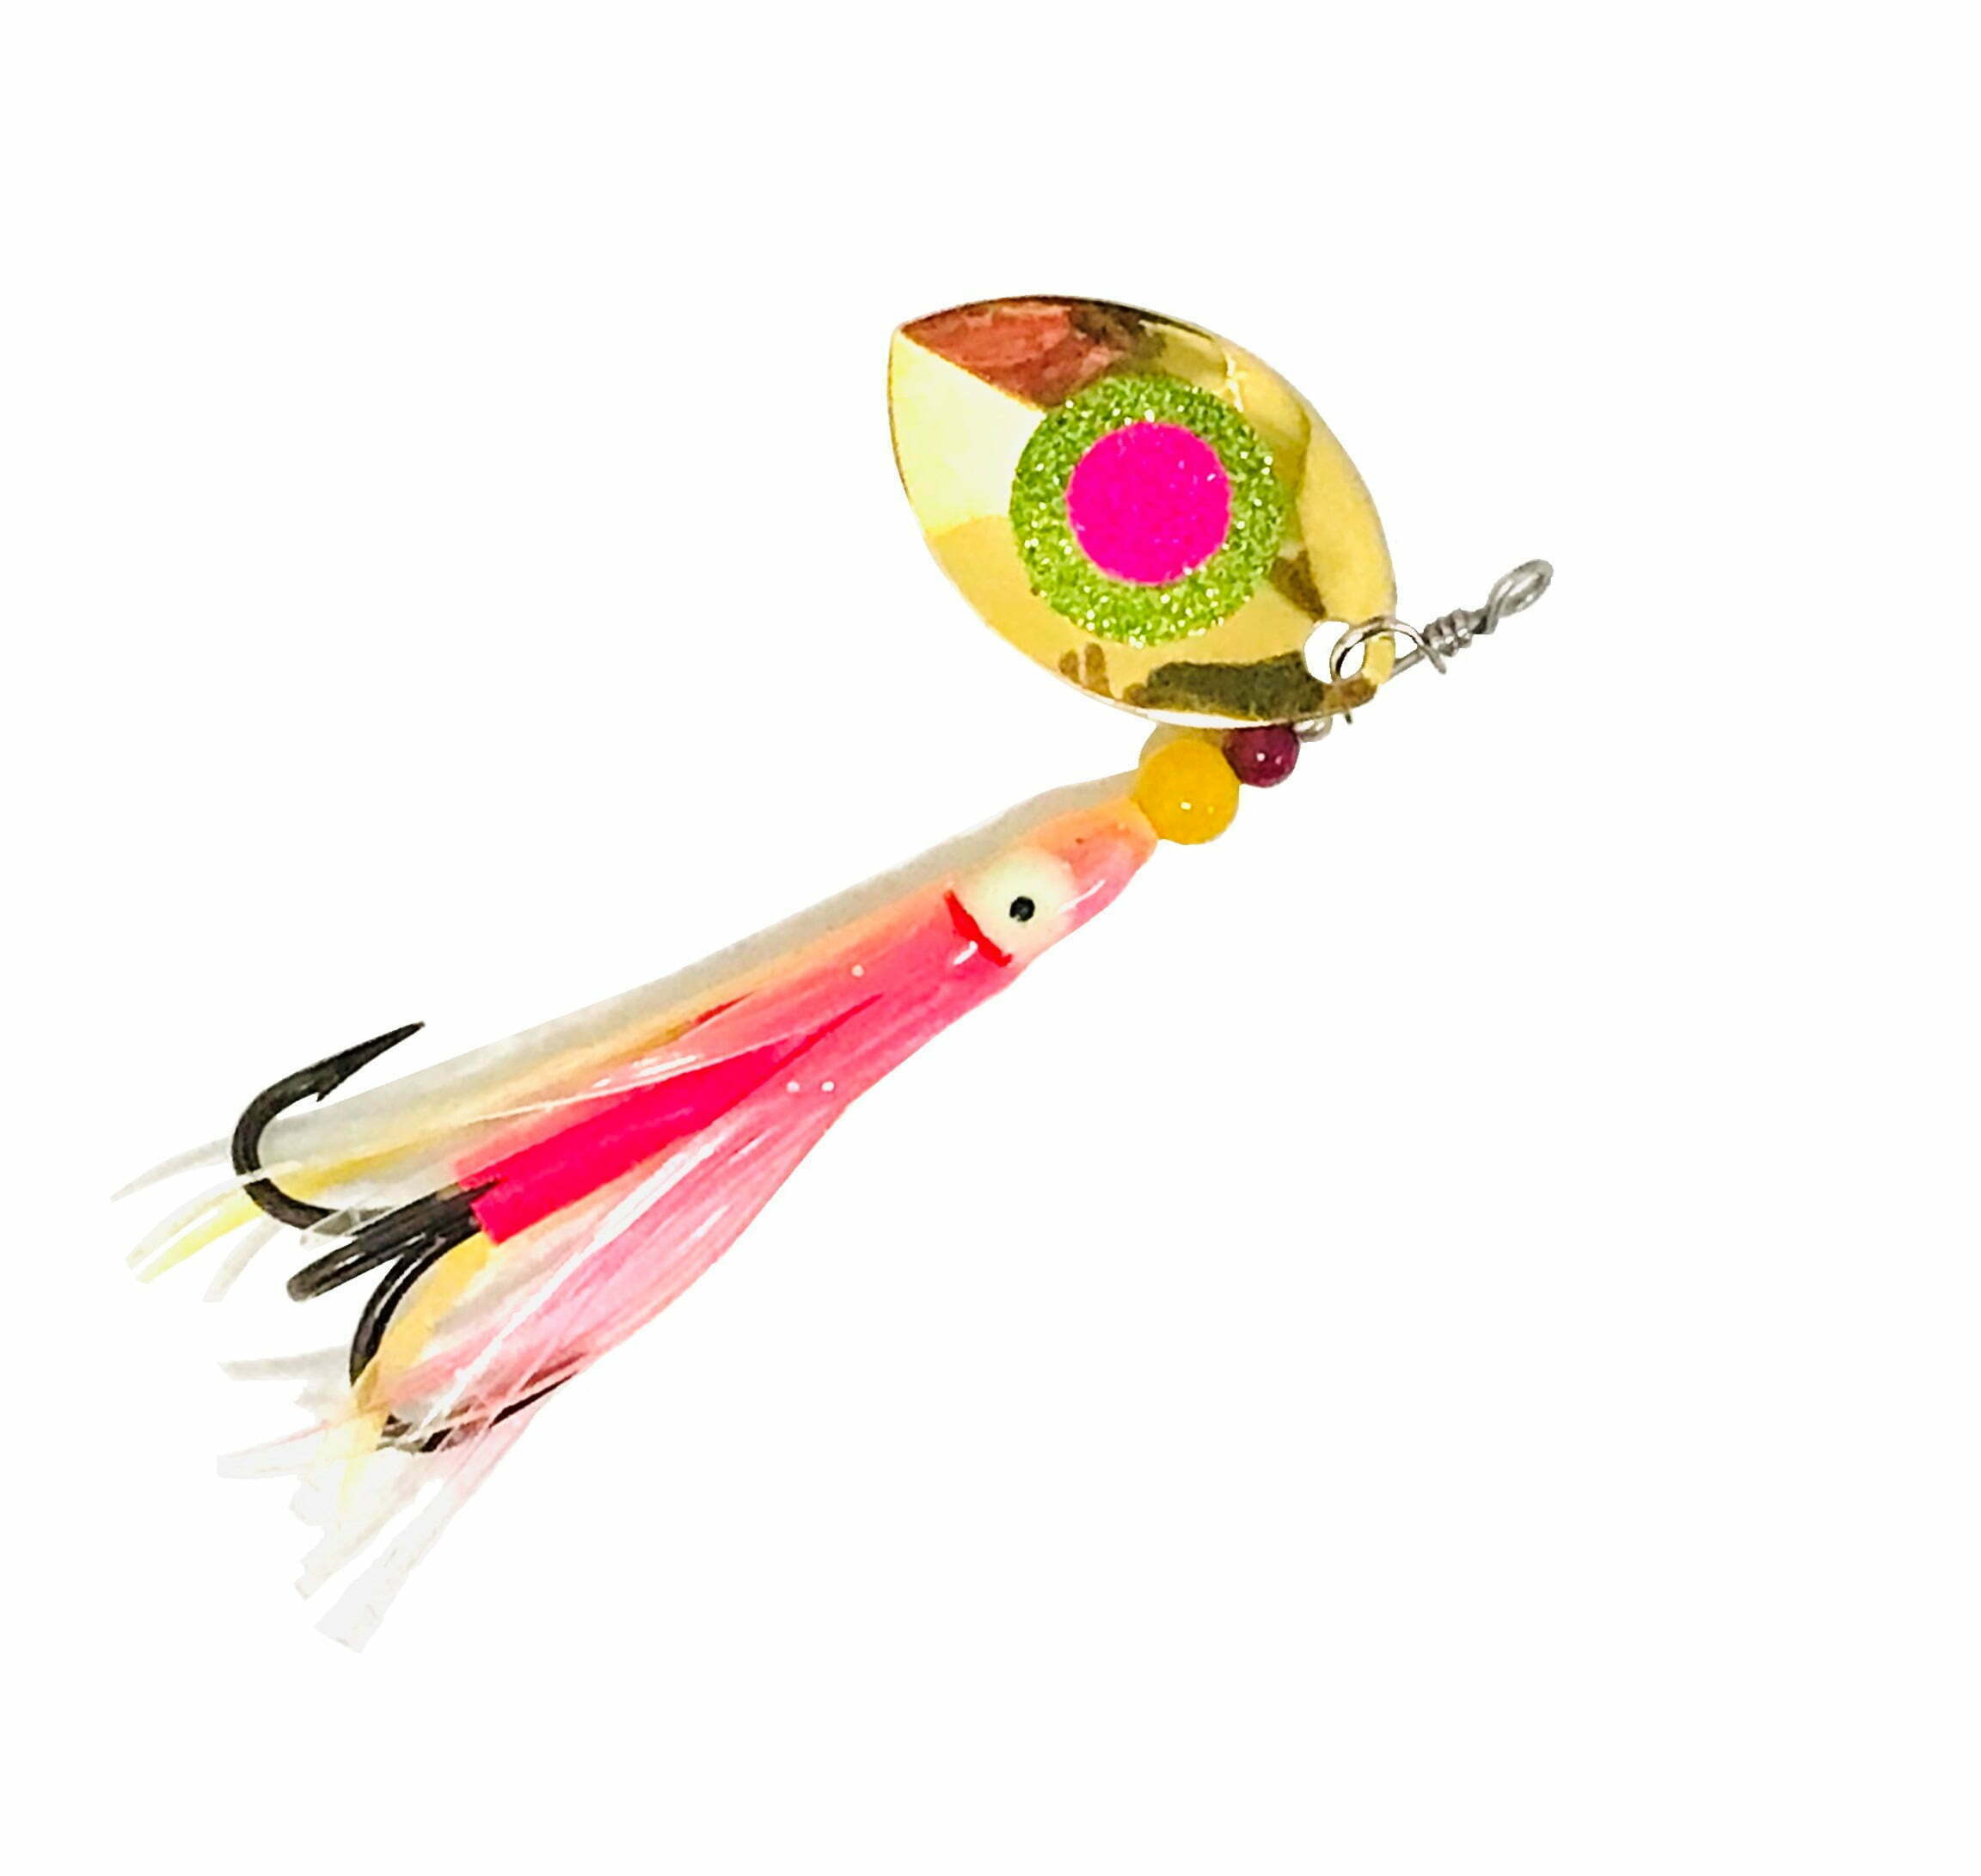 #4 Gold Plated HyperVis Cascade Golden Glow Squidy Dirty Troll Elite  Trolling Spinners for salmon, trout and steelhead